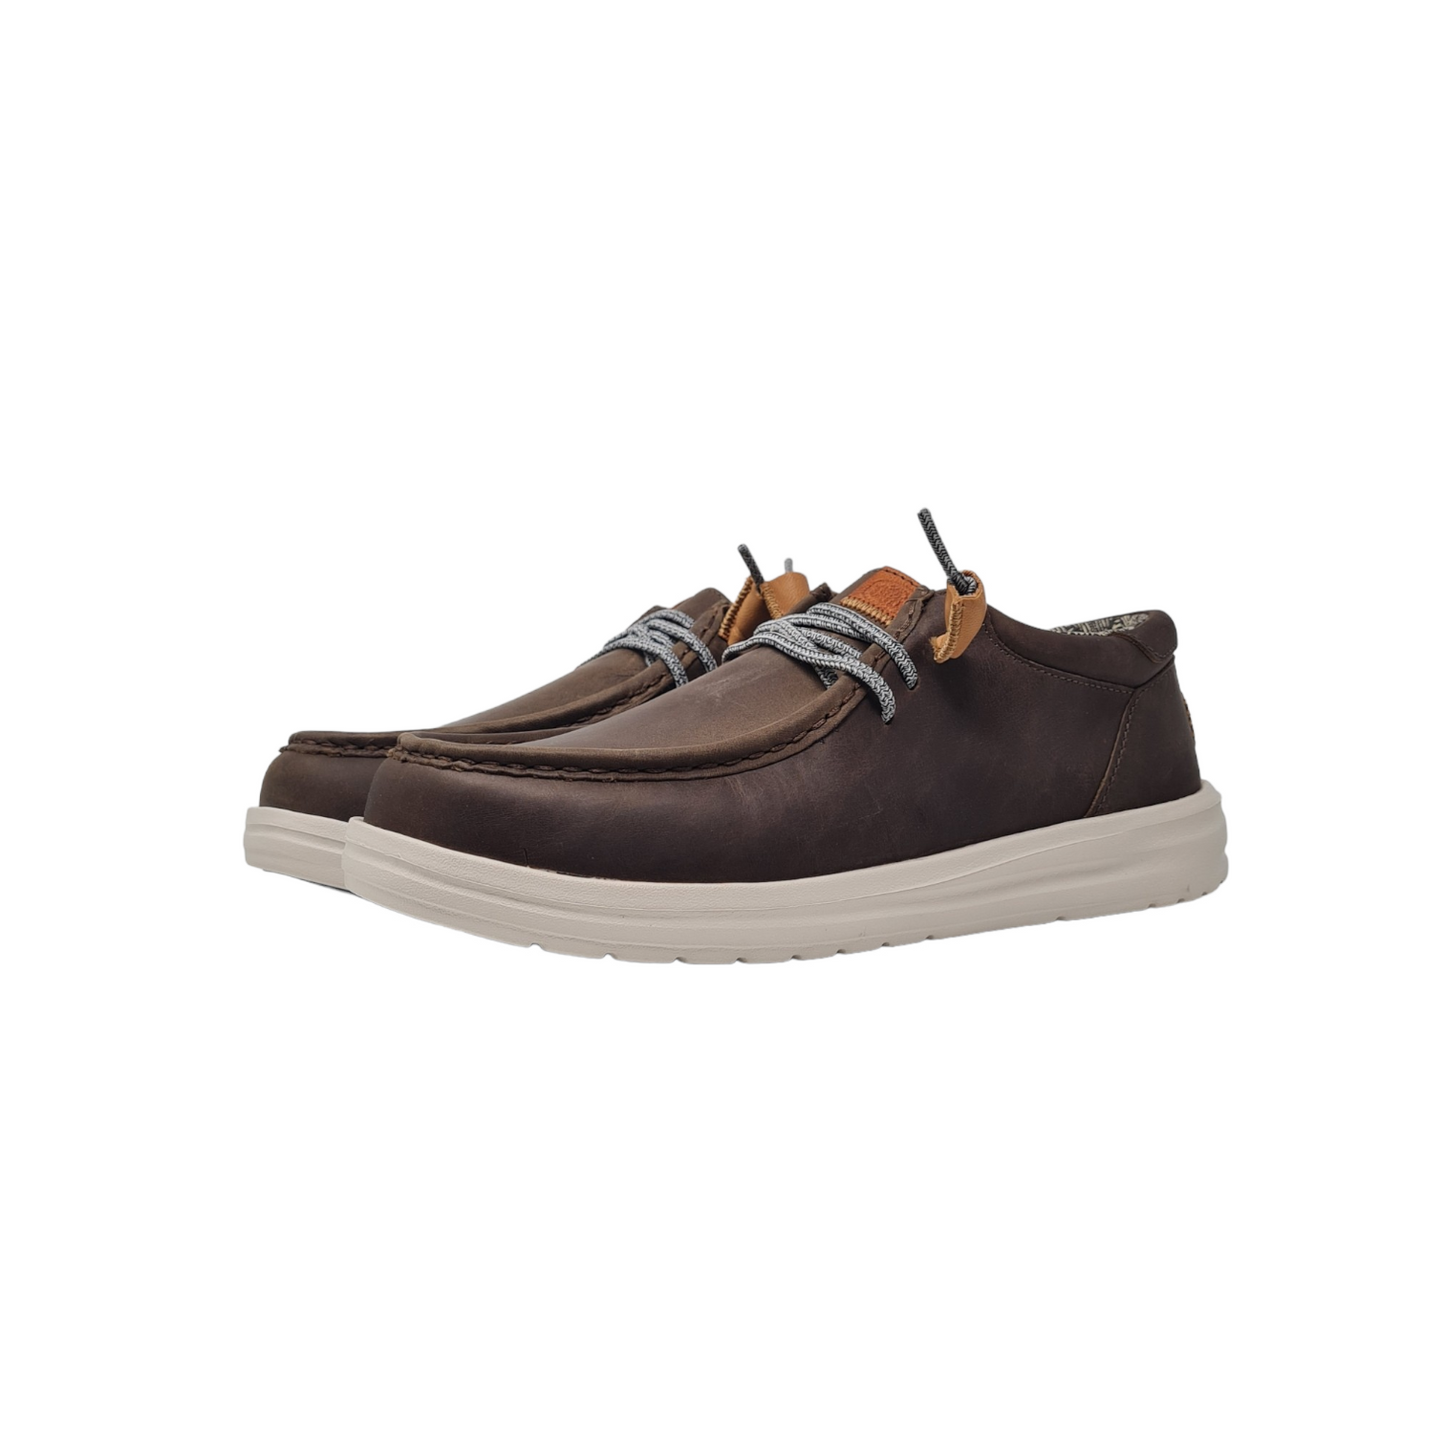 Wally grip craft moccasin 40175-030